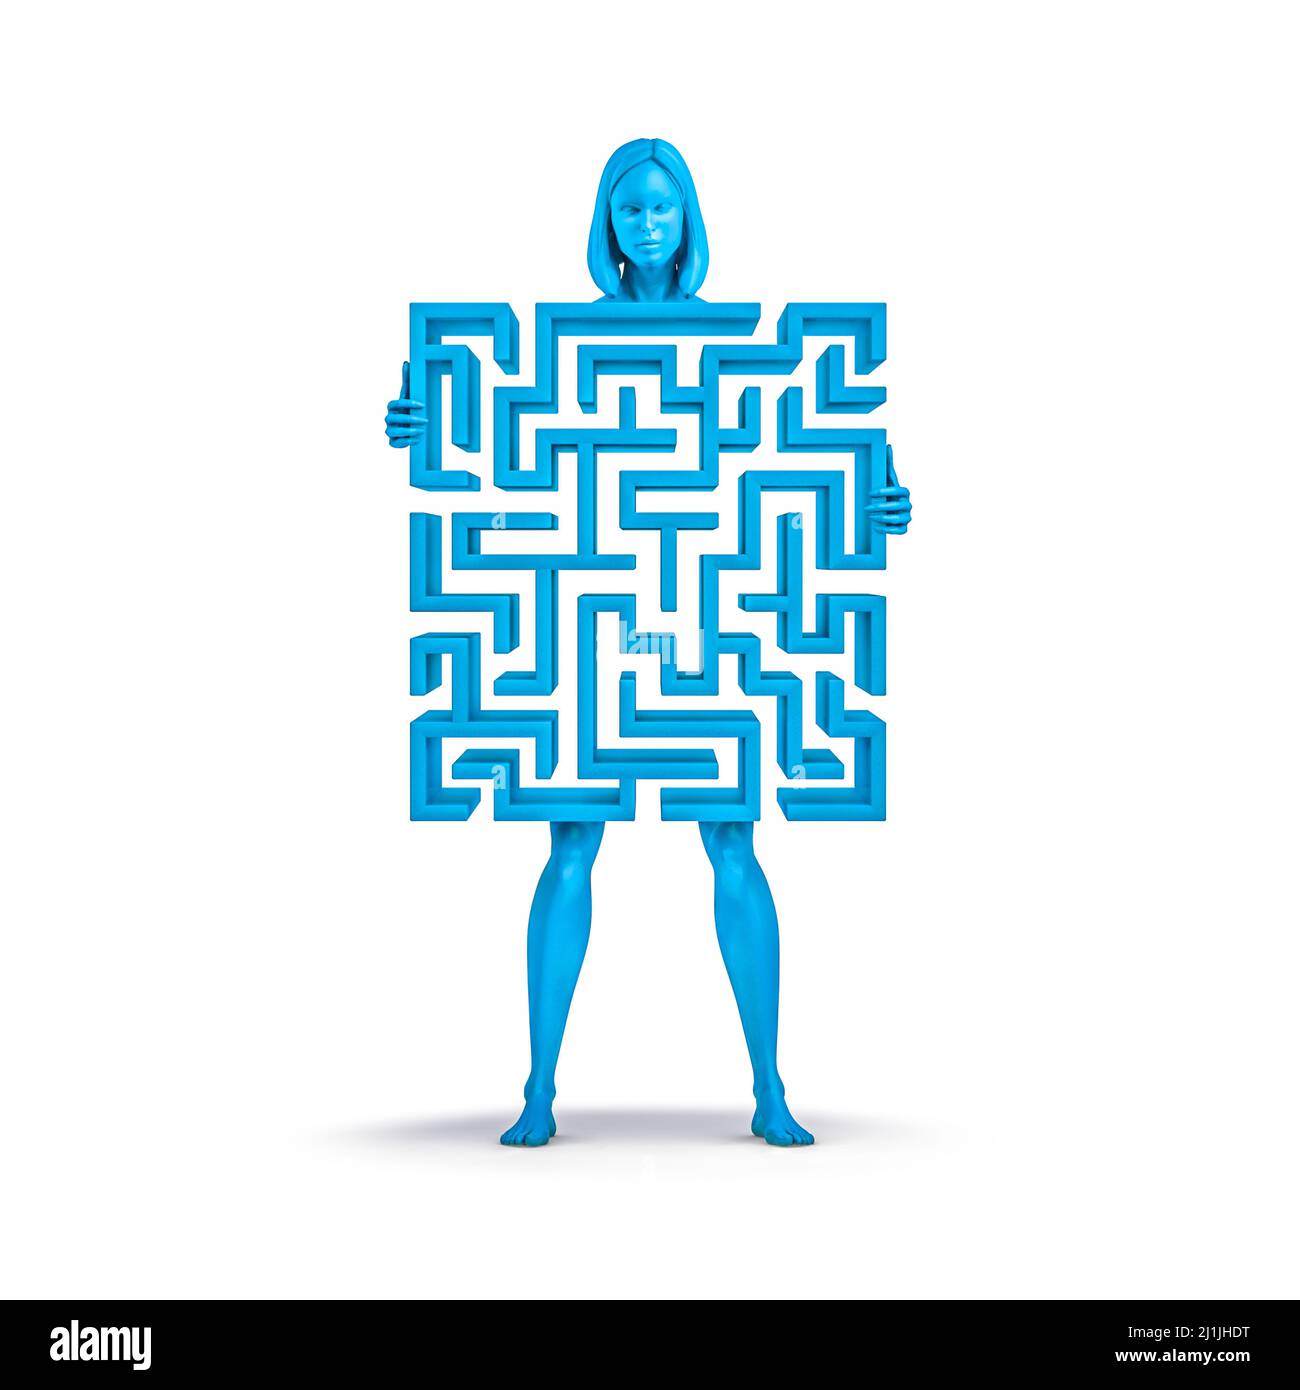 Maze woman blue - 3D illustration of female figure holding maze which forms her body isolated on white studio background Stock Photo